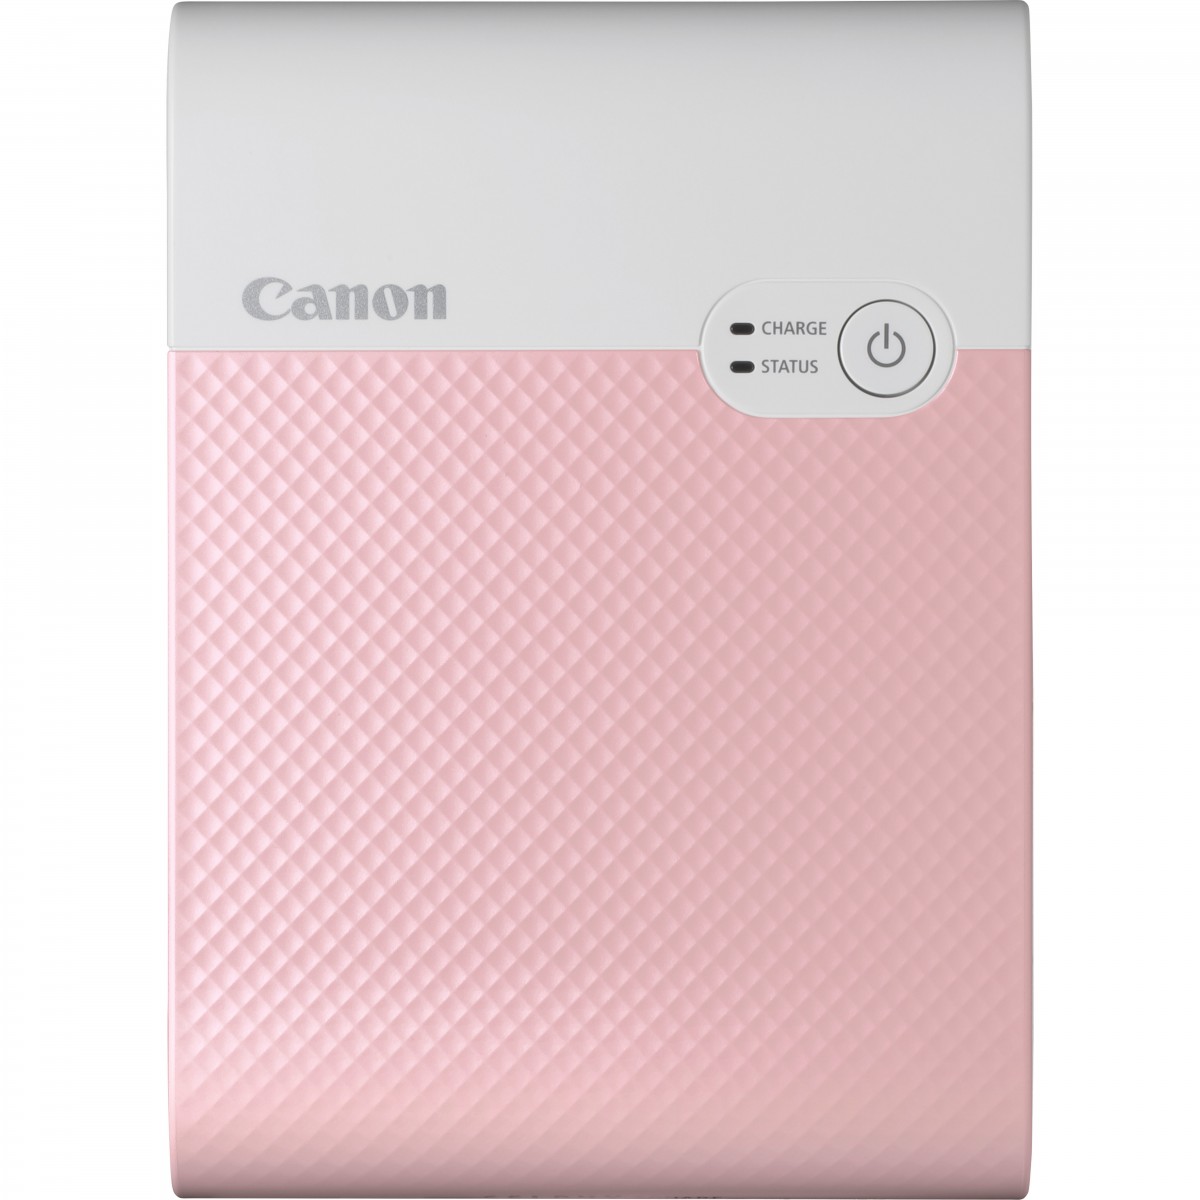 Canon SELPHY Square QX10 - Dye-sublimation - 287 x 287 DPI - Borderless printing - Wi-Fi - Pink